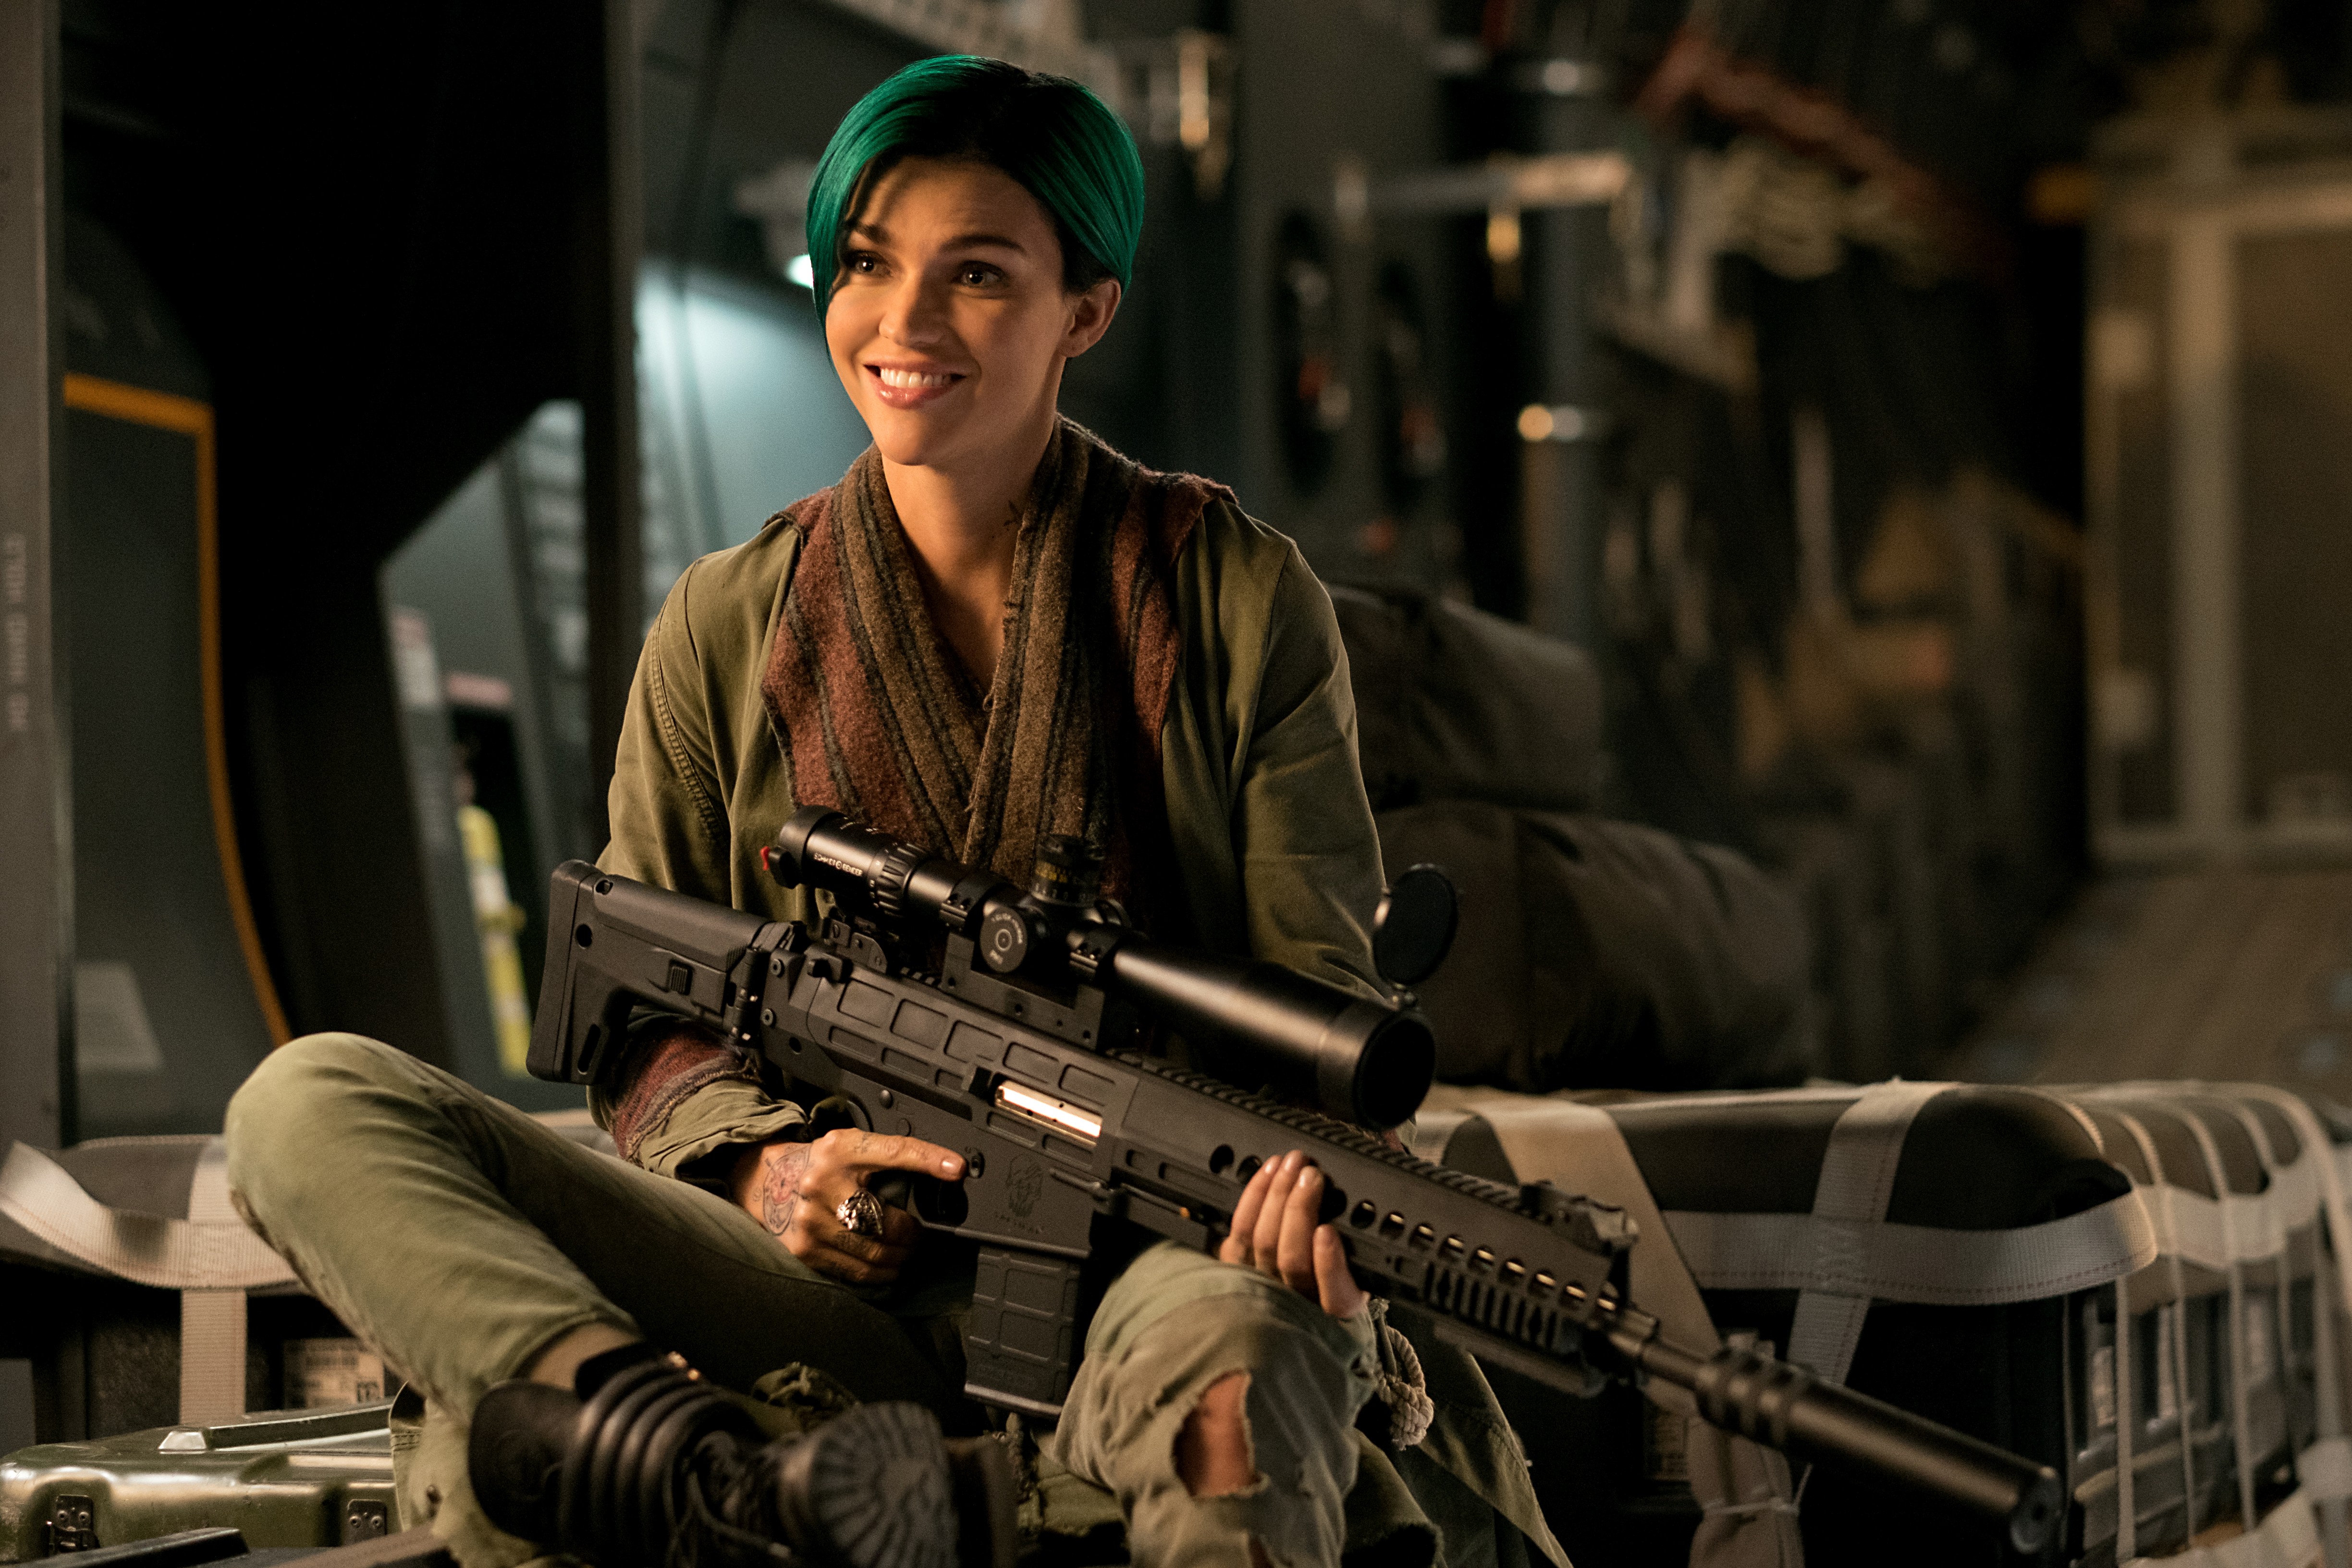 People 4896x3264 xXx: Return of Xander Cage smiling weapon dyed hair Ruby Rose (actress) women